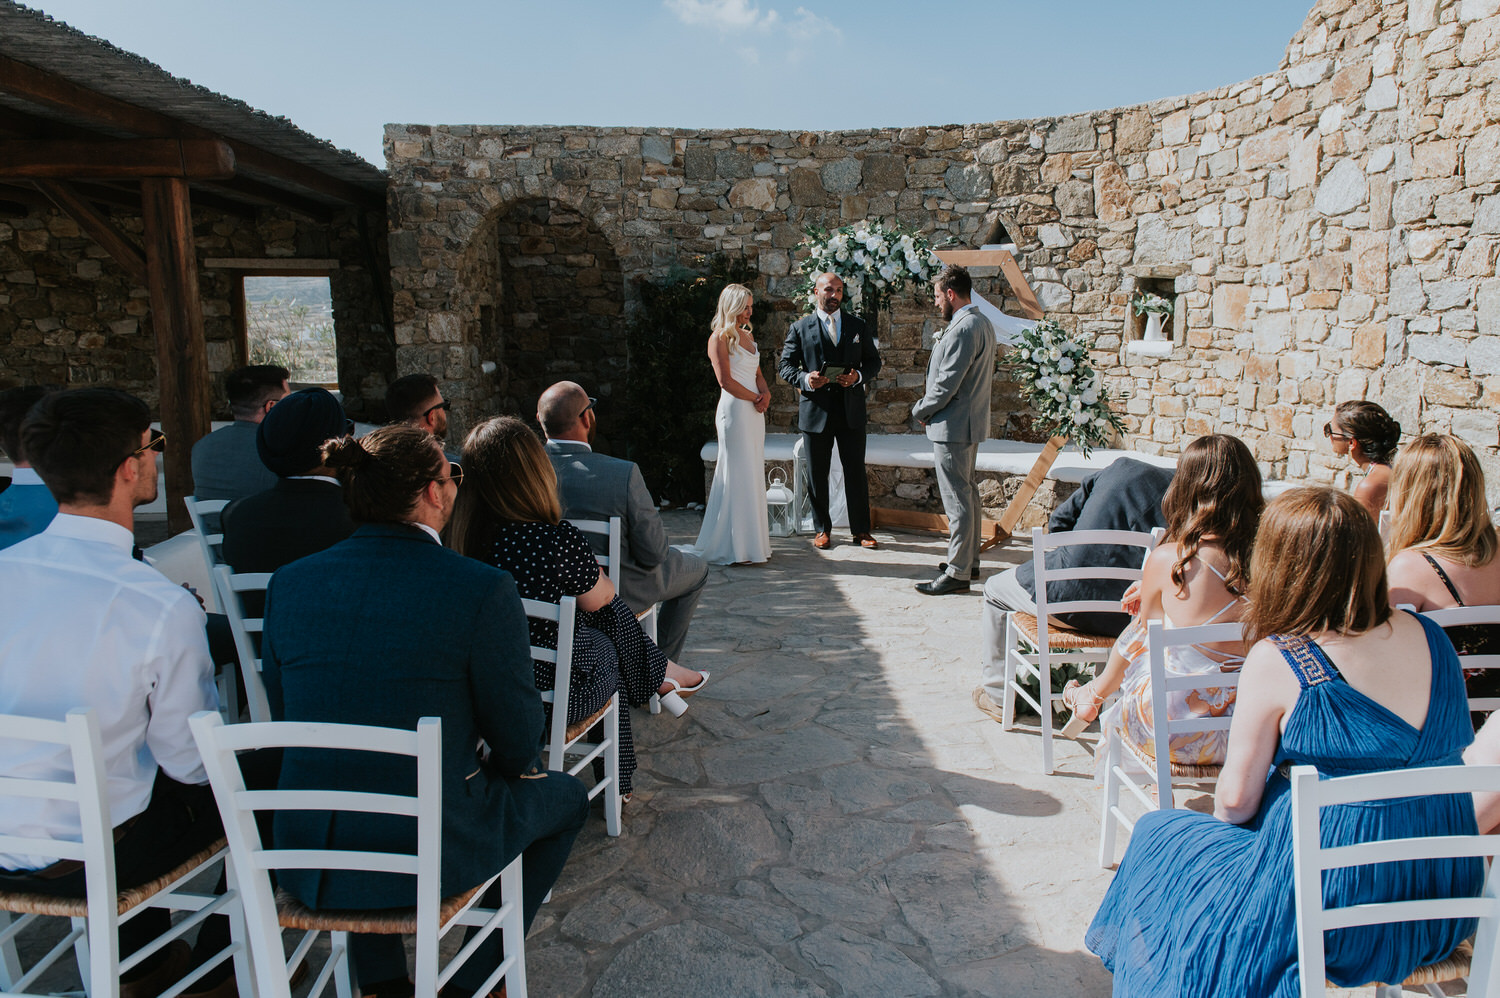 Mykonos wedding photographer: bride and groom stand in front of the the celebrant and the floral arch with guests sat in the foreground.